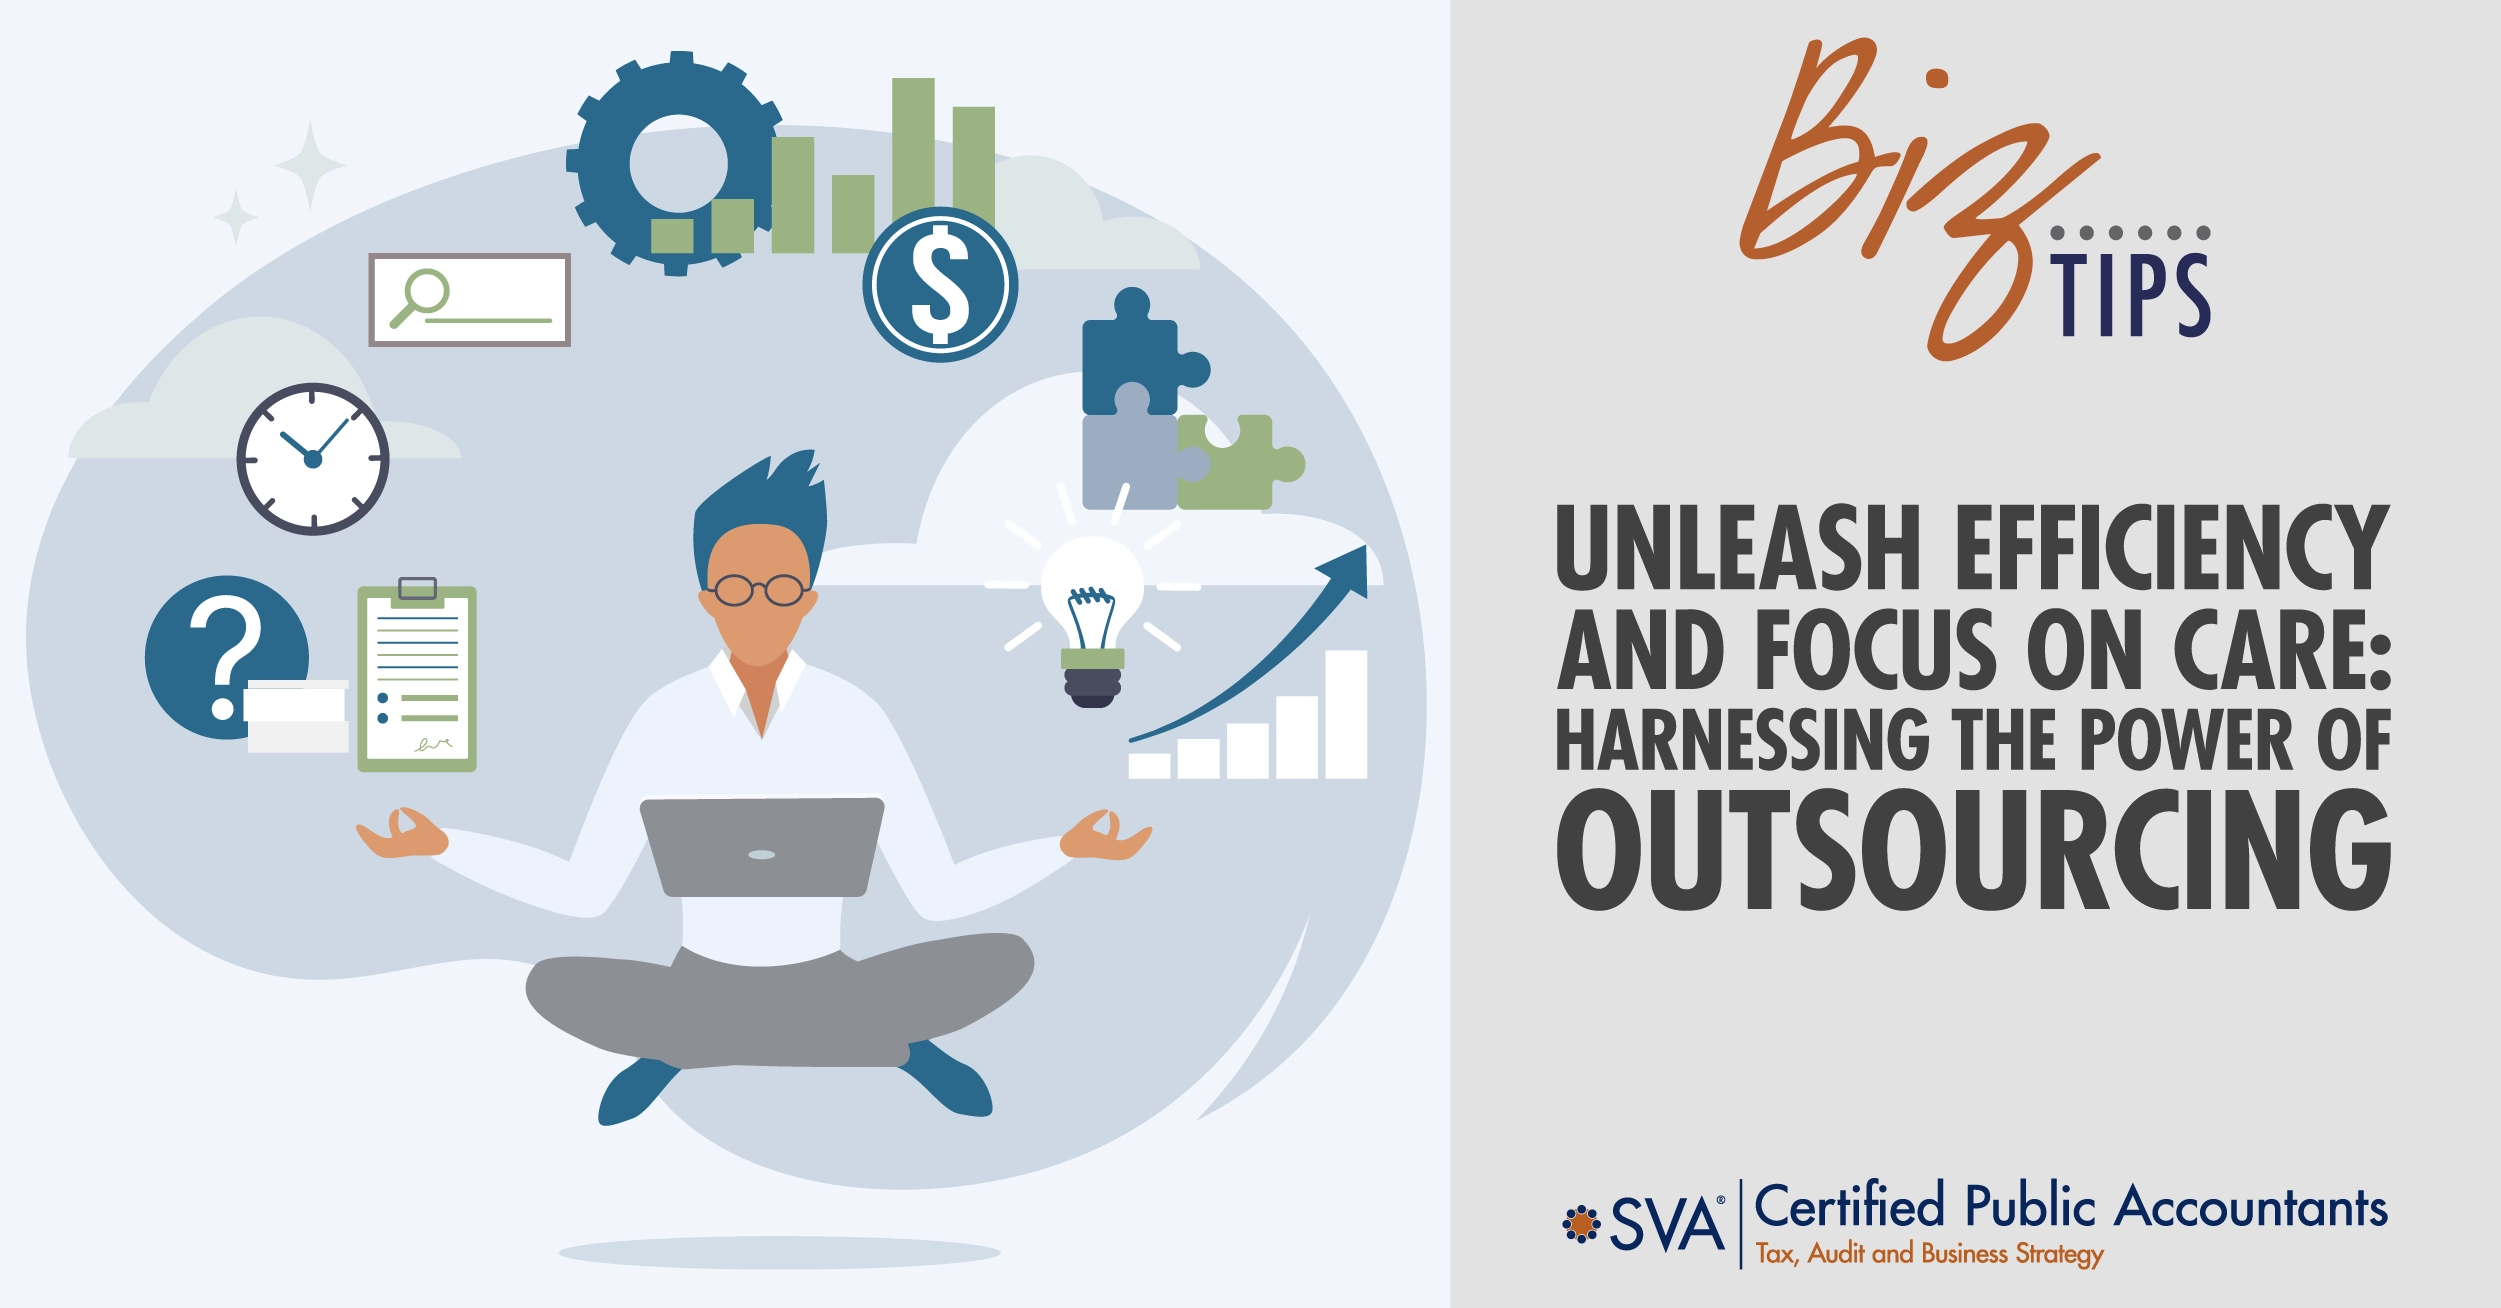 Unleash Efficiency and Focus on Care: Harnessing the Power of Outsourcing